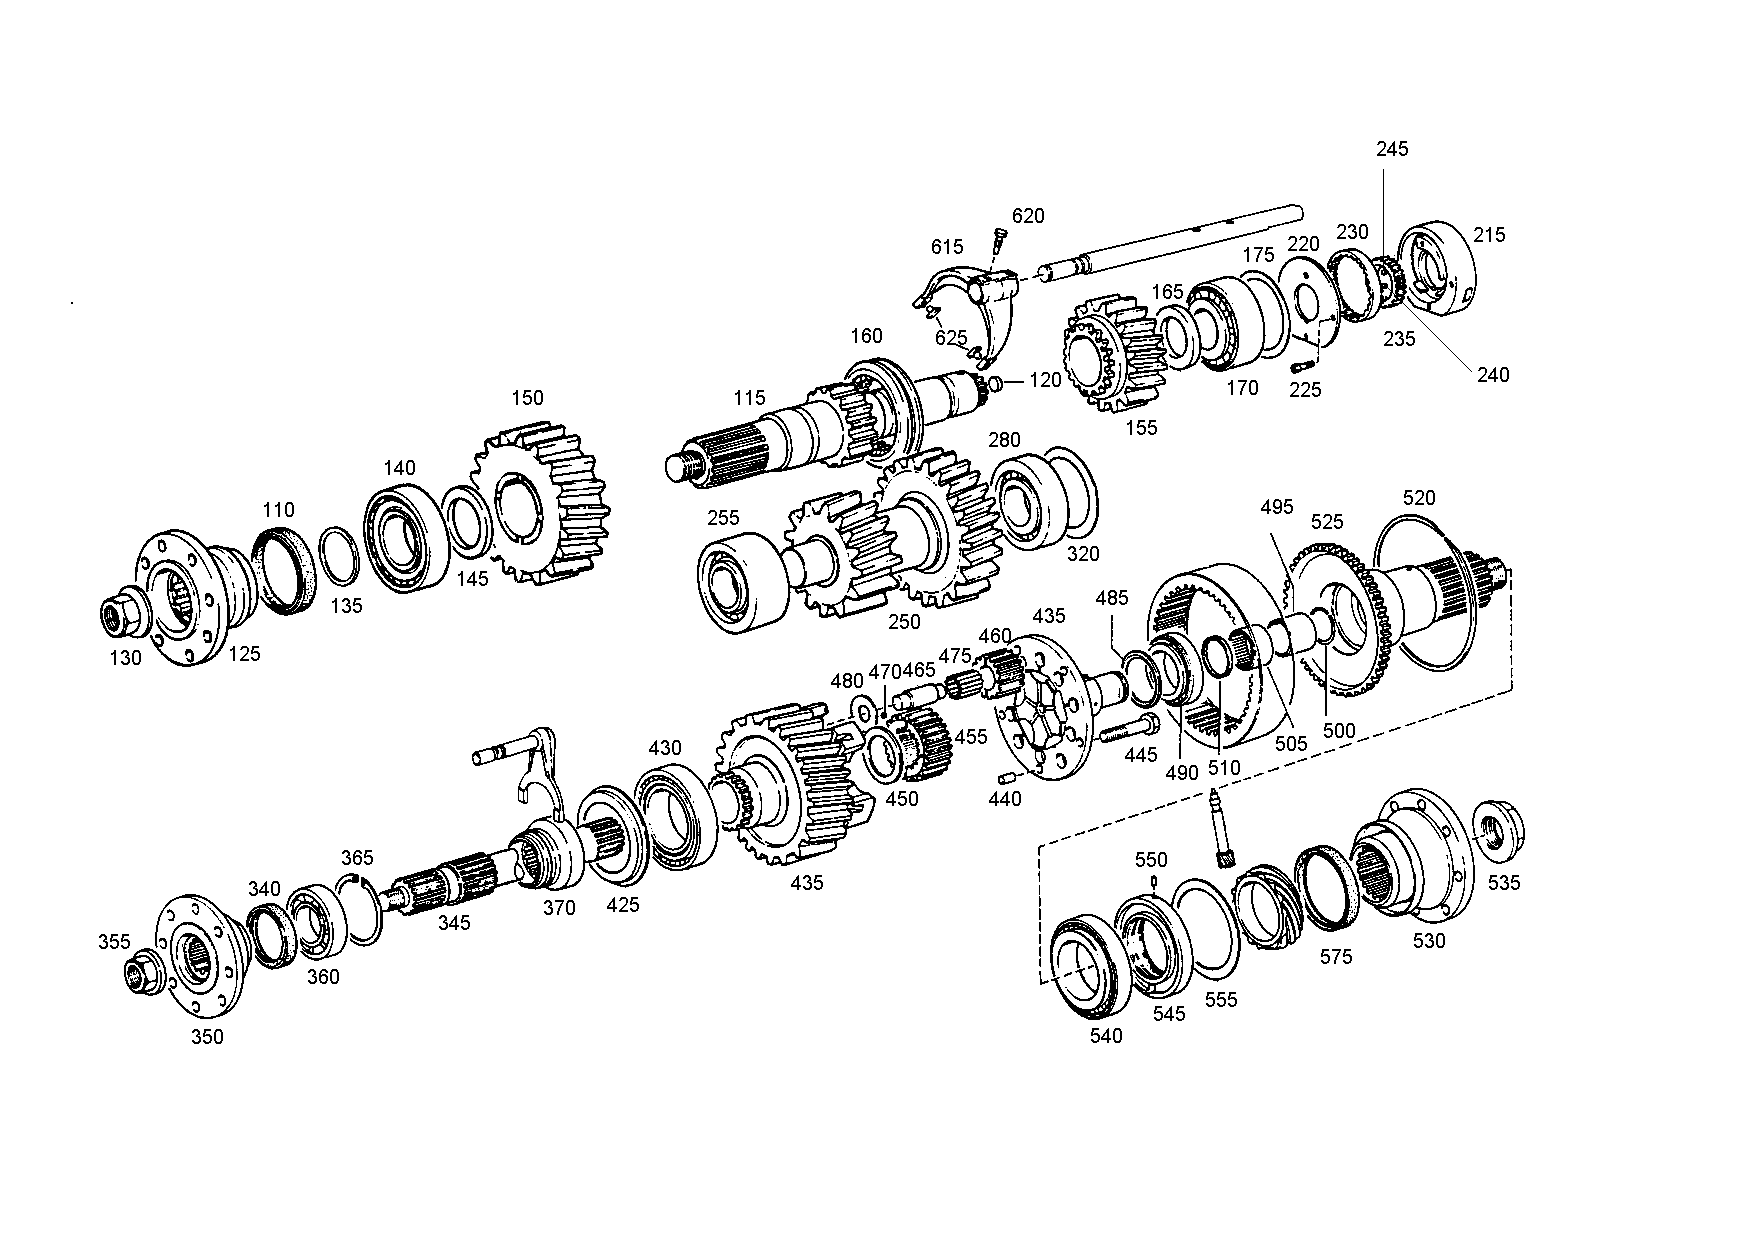 drawing for RABA 199114250016 - ROLLER SET (figure 5)